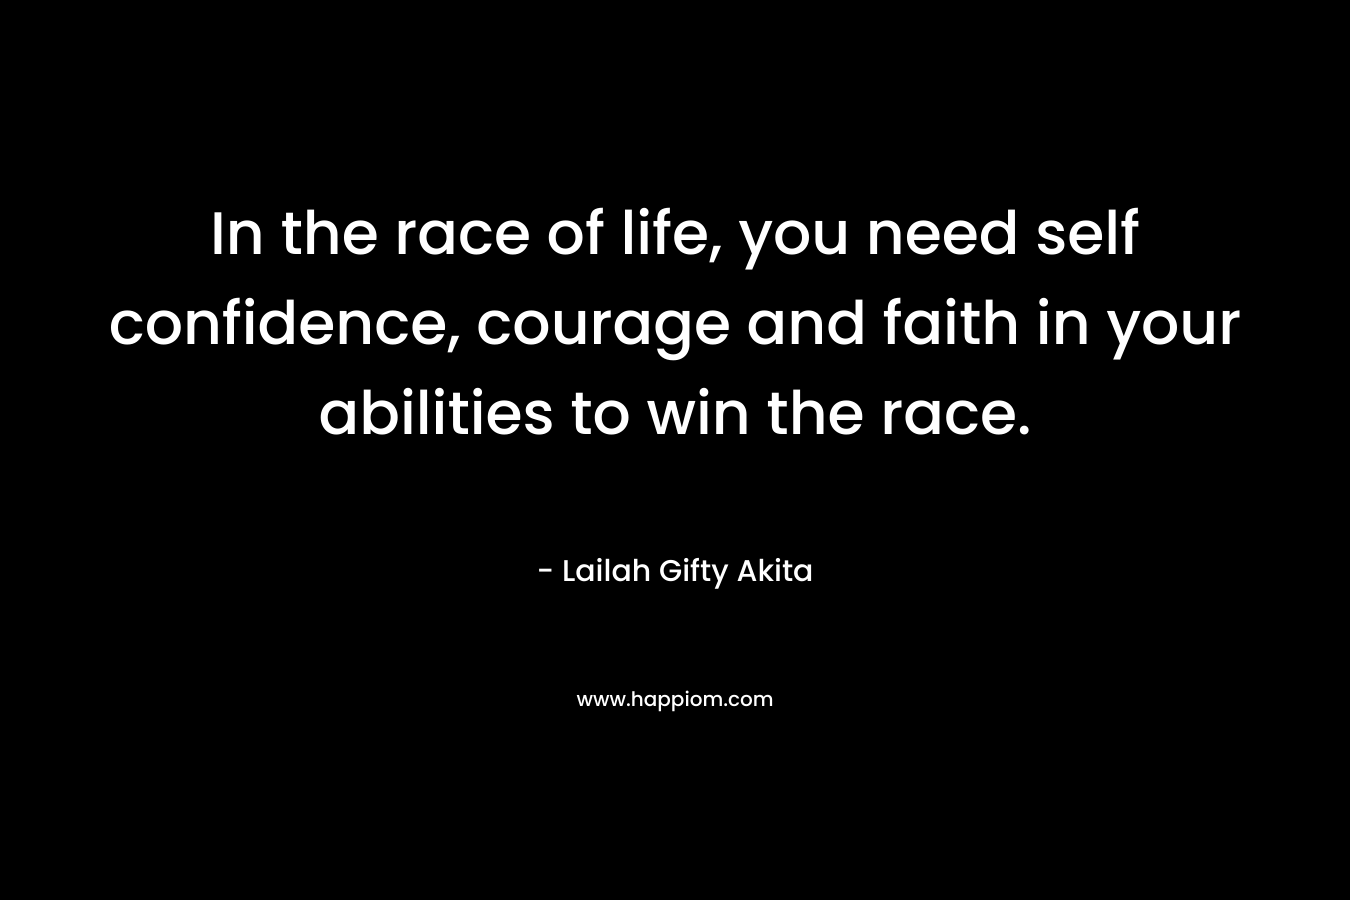 In the race of life, you need self confidence, courage and faith in your abilities to win the race.